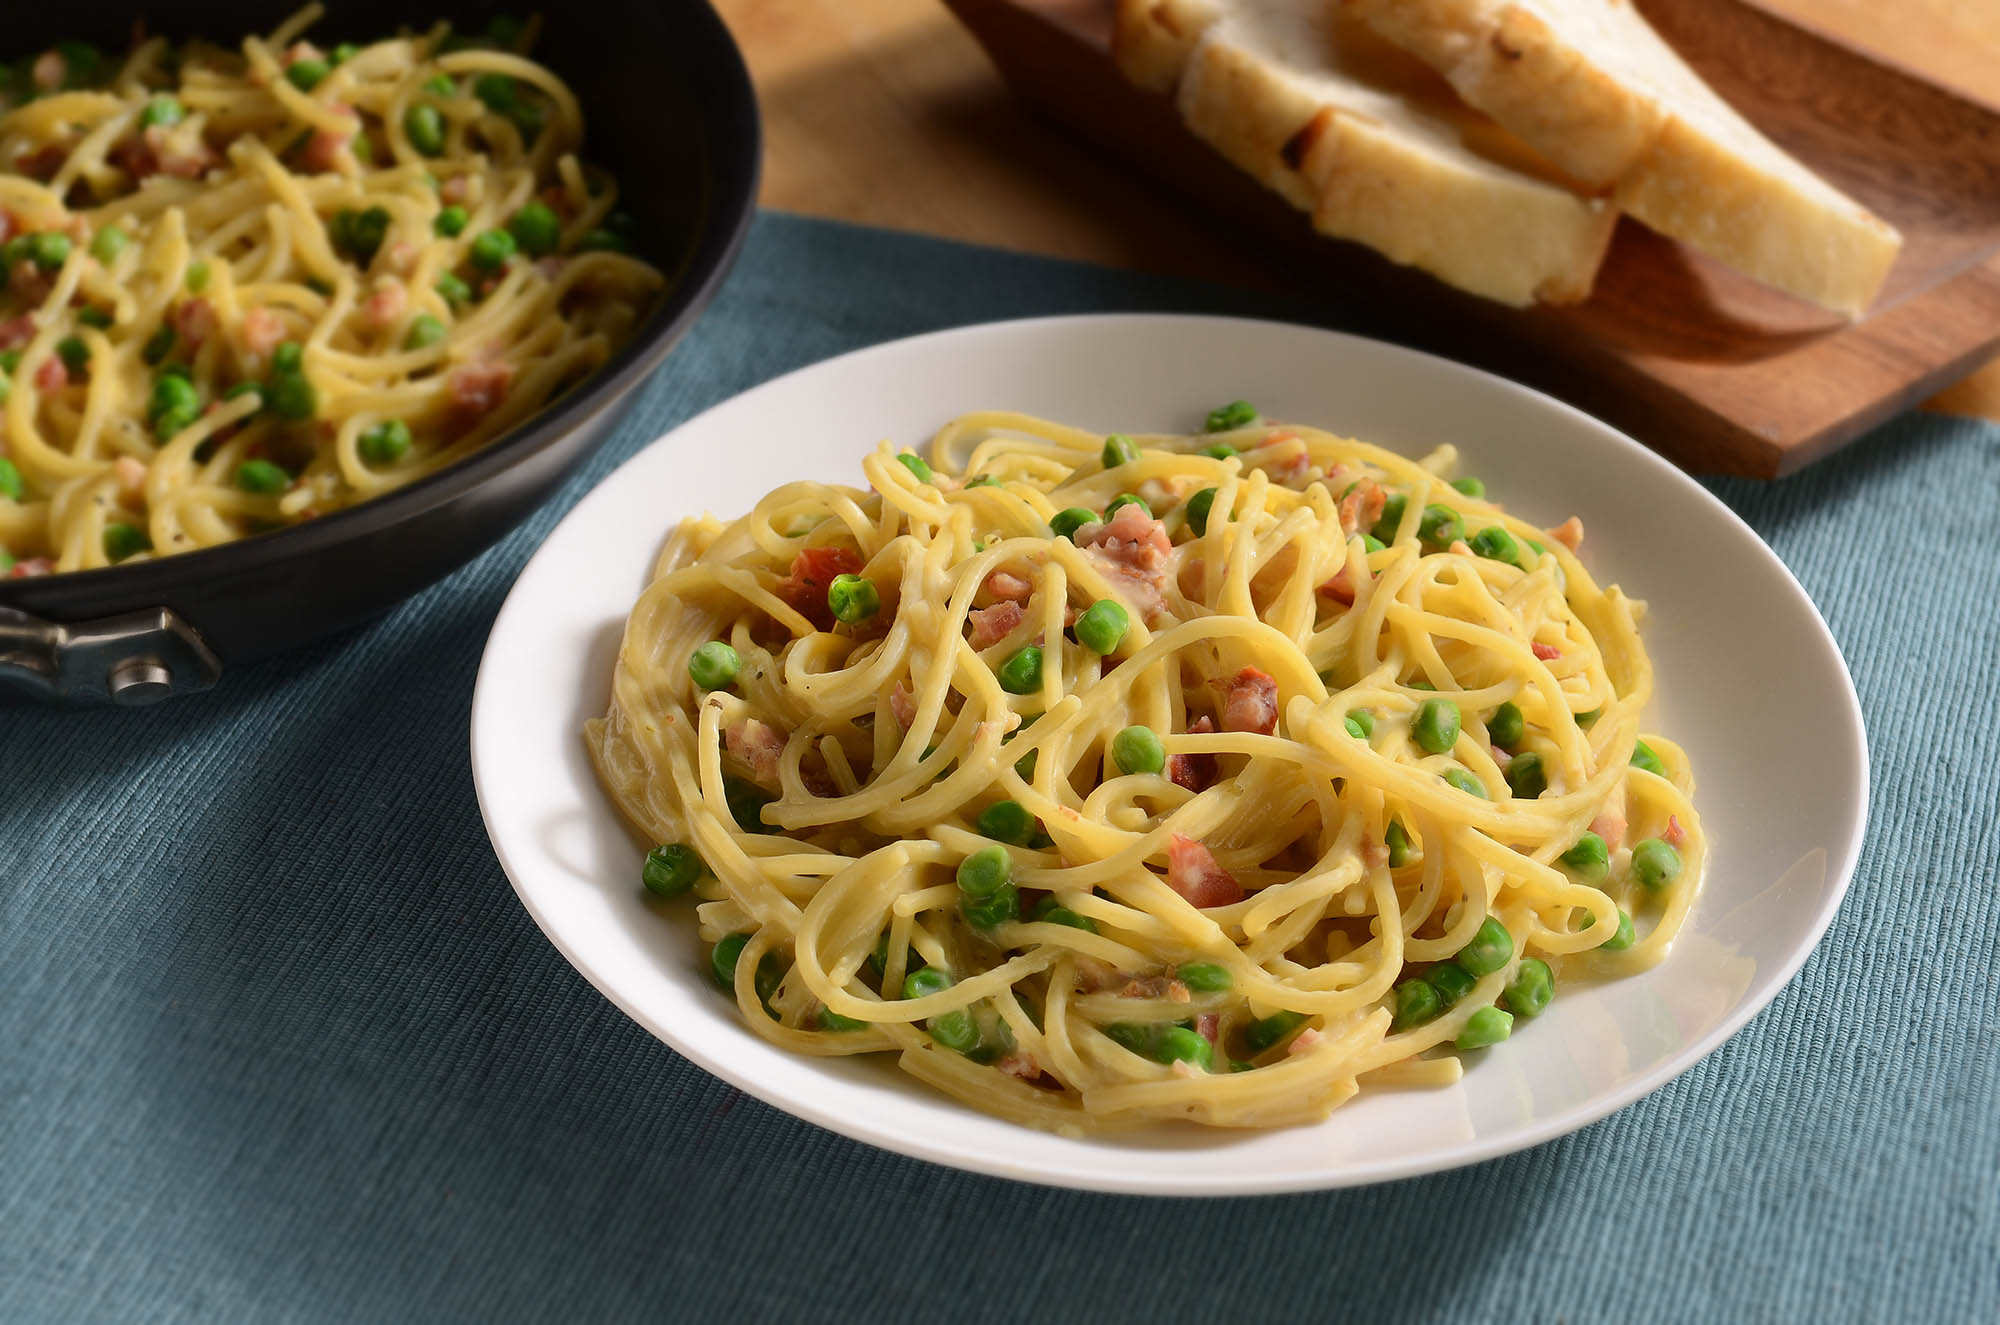 Linguine with crispy bacon and peas in a creamy sauce, topped with Parmesan cheese